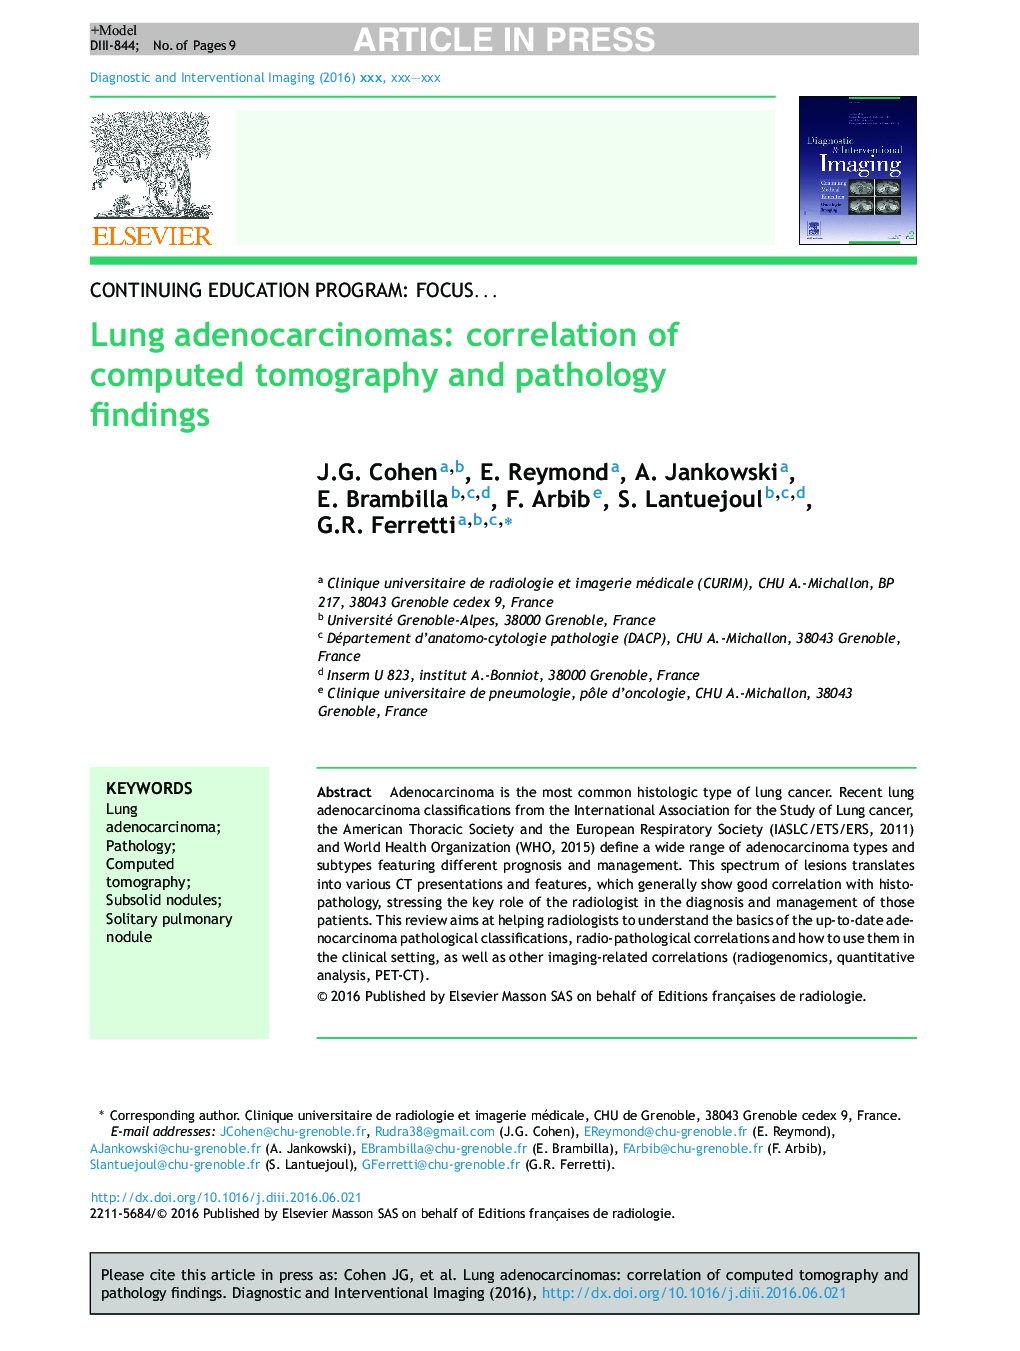 Lung adenocarcinomas: correlation of computed tomography and pathology findings